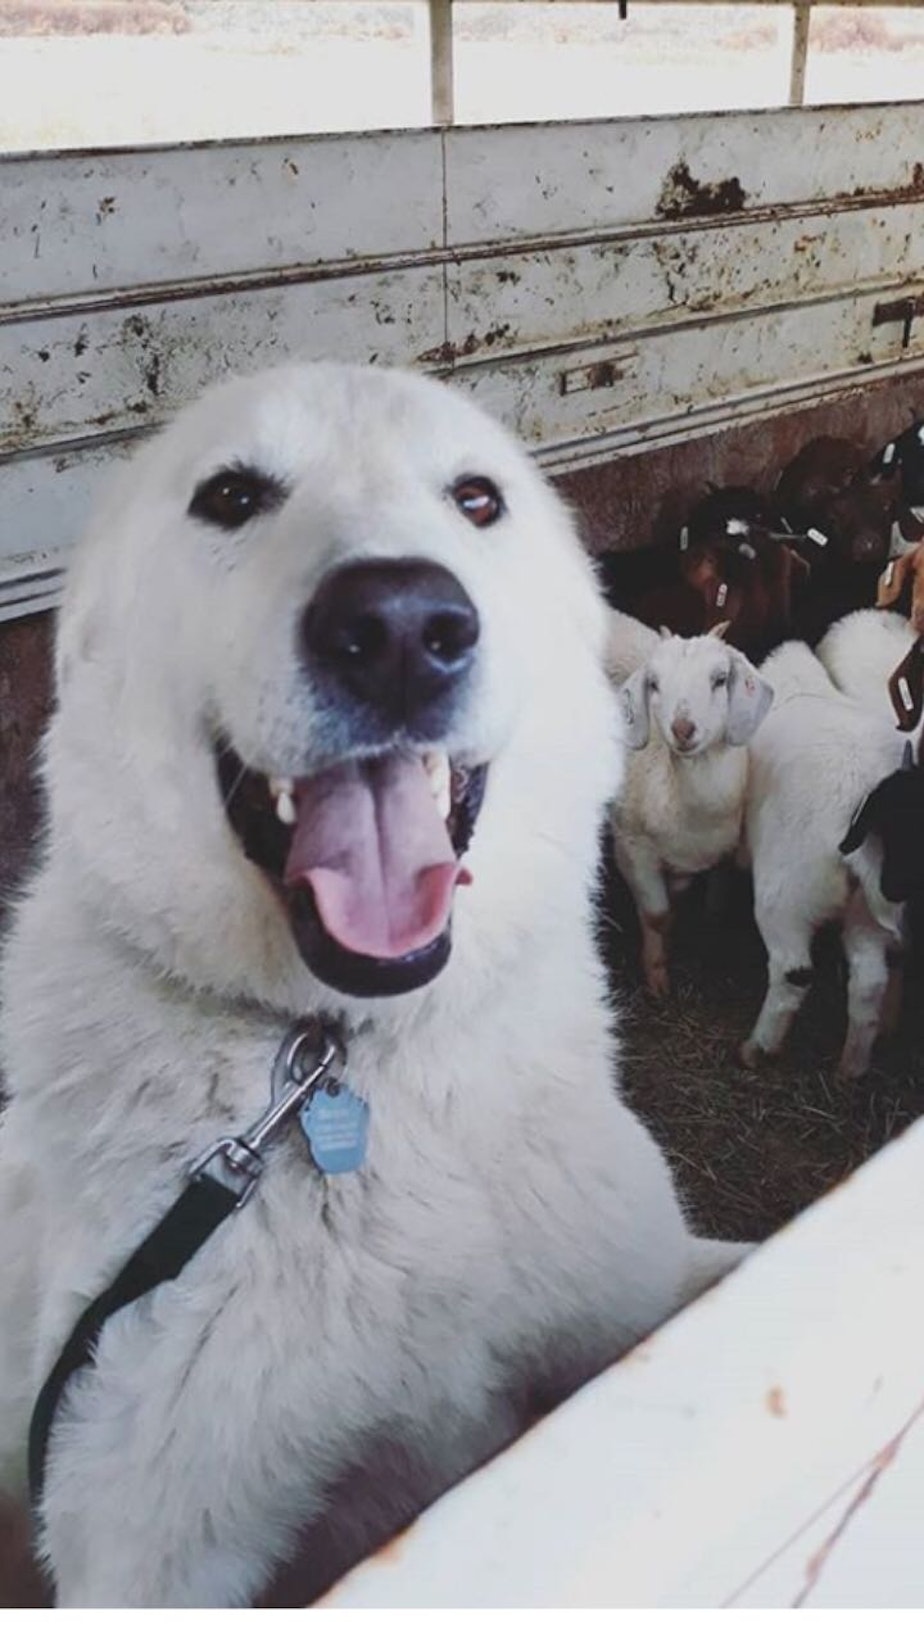 caption: Nanny, a Great Pyrenees mix, is so named for her occupation - she's the goats' protector, ensuring that predators like cougars don't attack the herd.